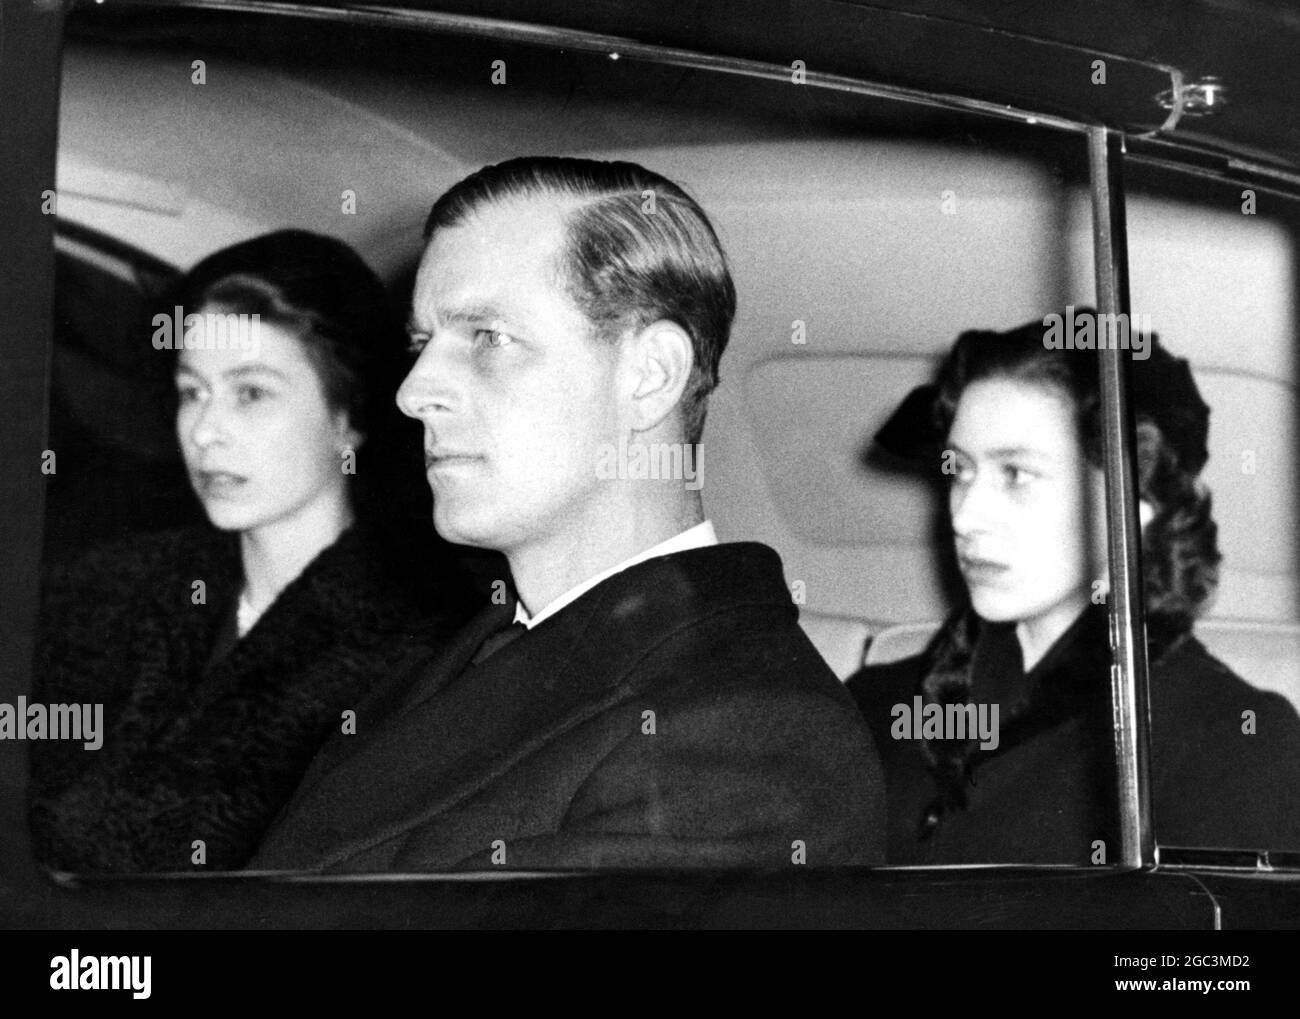 14 February 1952 Queen Elizabeth II, The Duke of Edinburgh, and Princess Margaret on the way to join mourning subjects at the bier of her father, King George VI at Westminster Hall, London, England. ©TopFoto Stock Photo